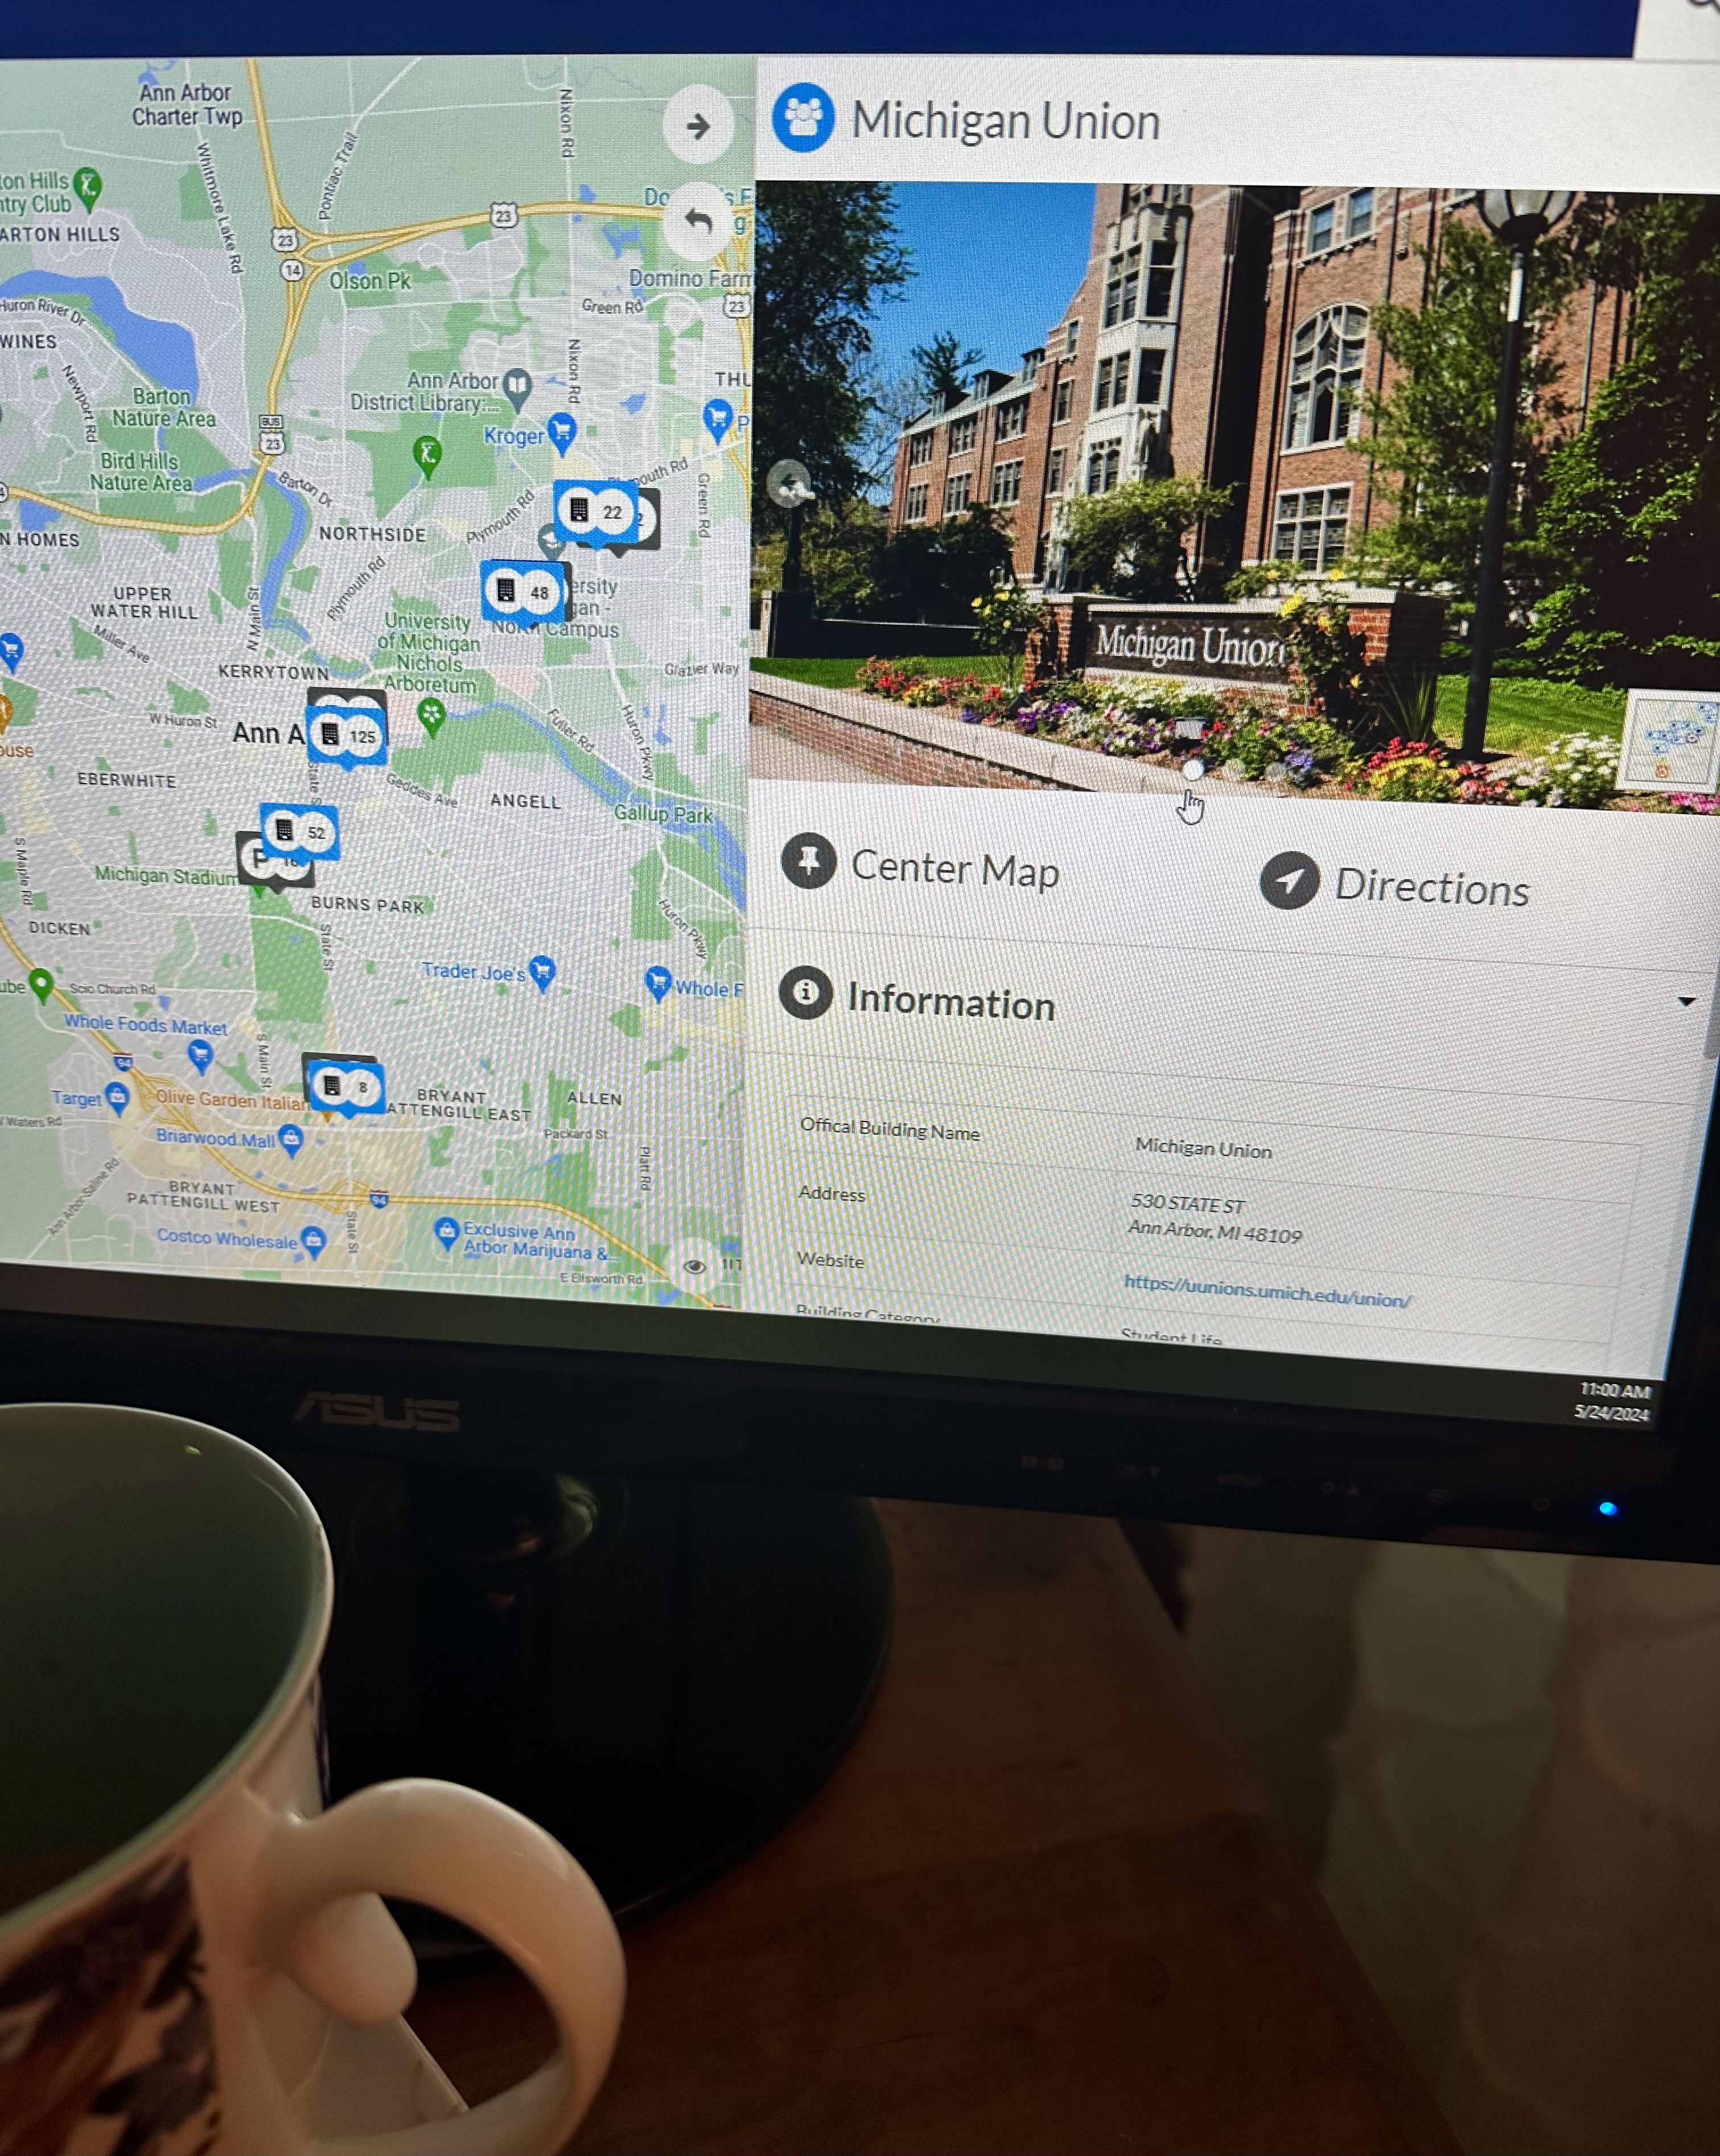 View of computer screen viewing Campus Maps at Michigan Union, with coffee cup in foreground.